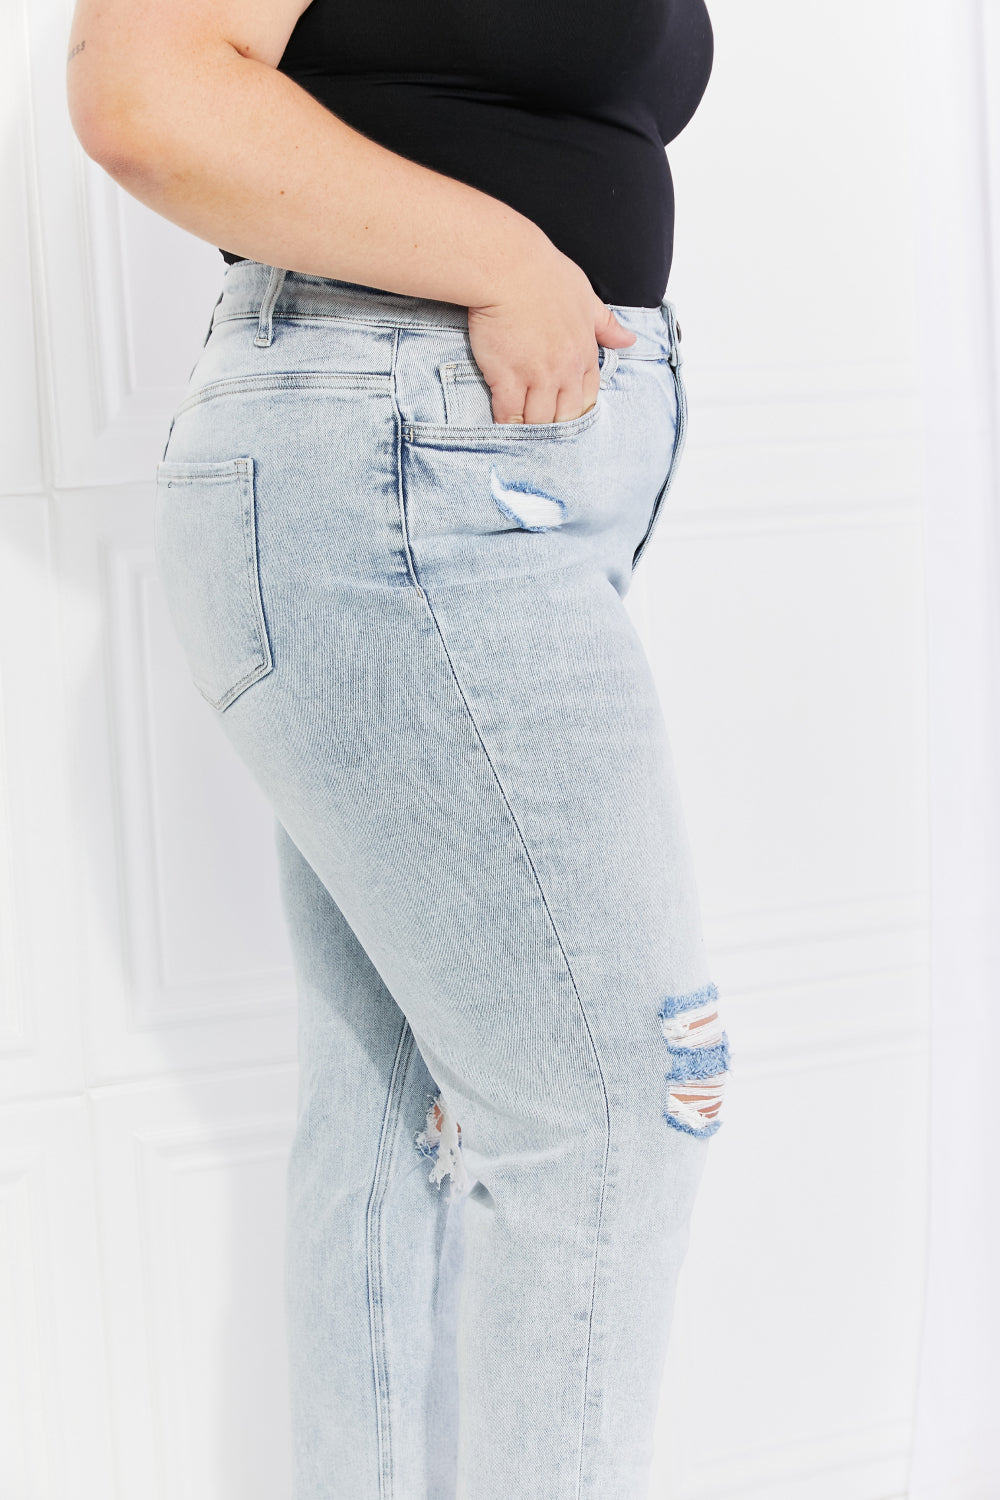 Stand Up & Stand Out Cropped Jeans